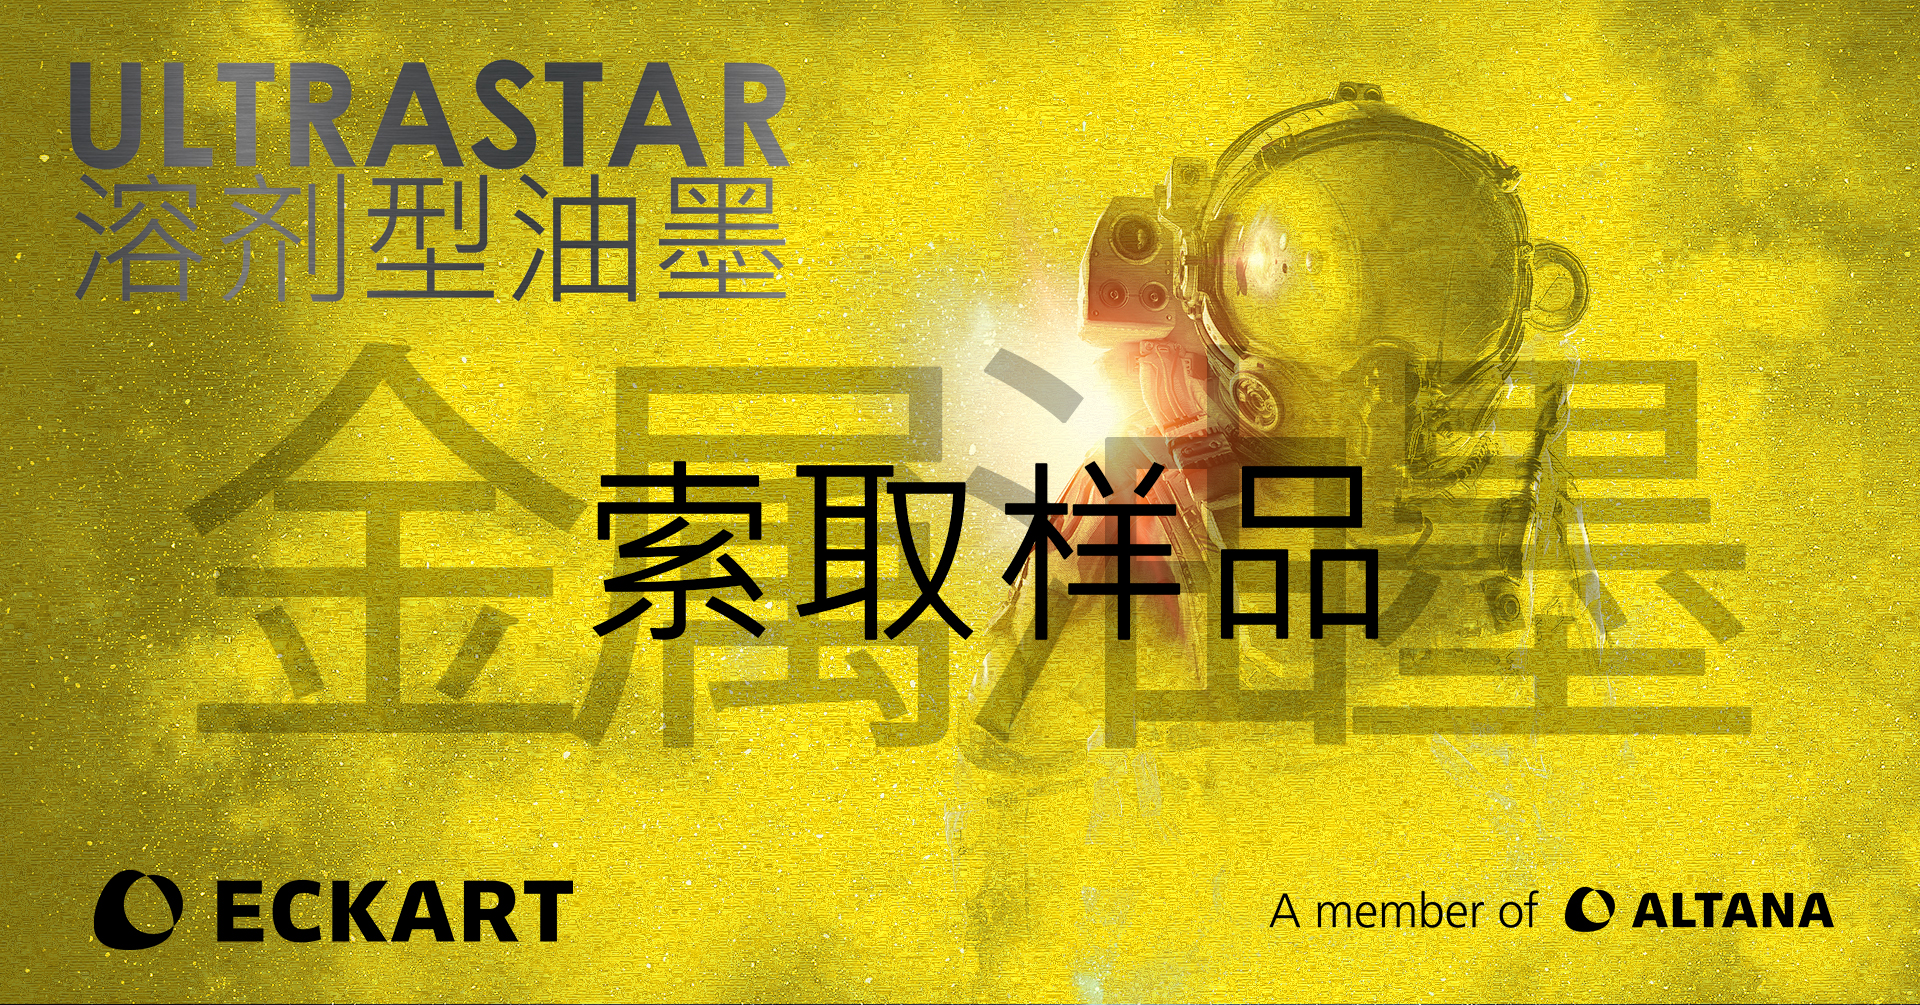 gold spaceman advert in chinese